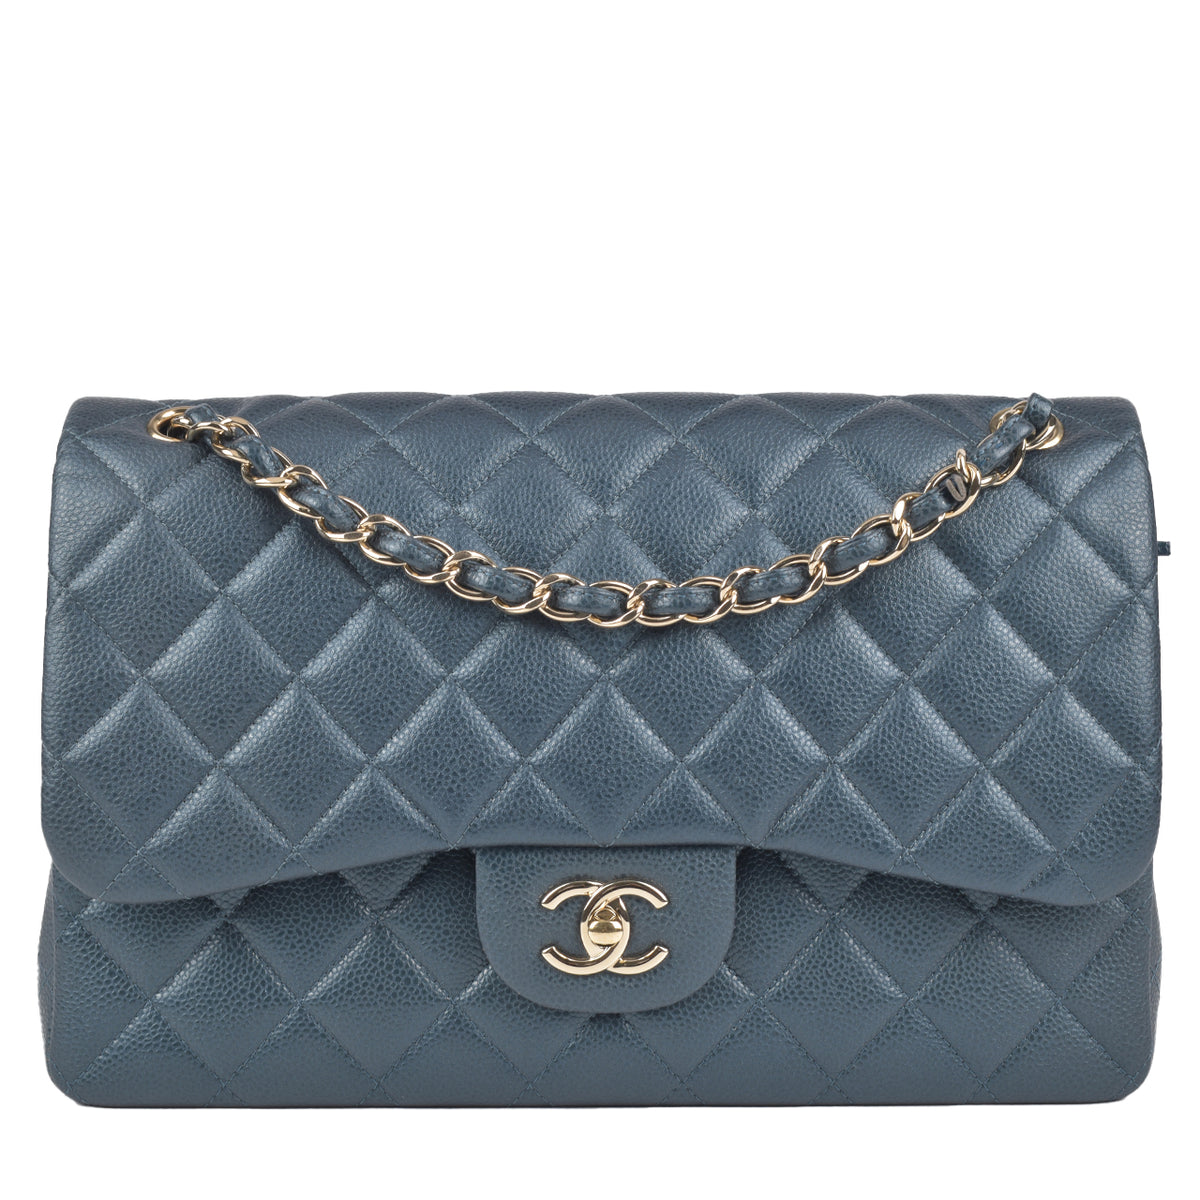 Chanel - Glampot  Authentic Preloved and Brand New Bags and